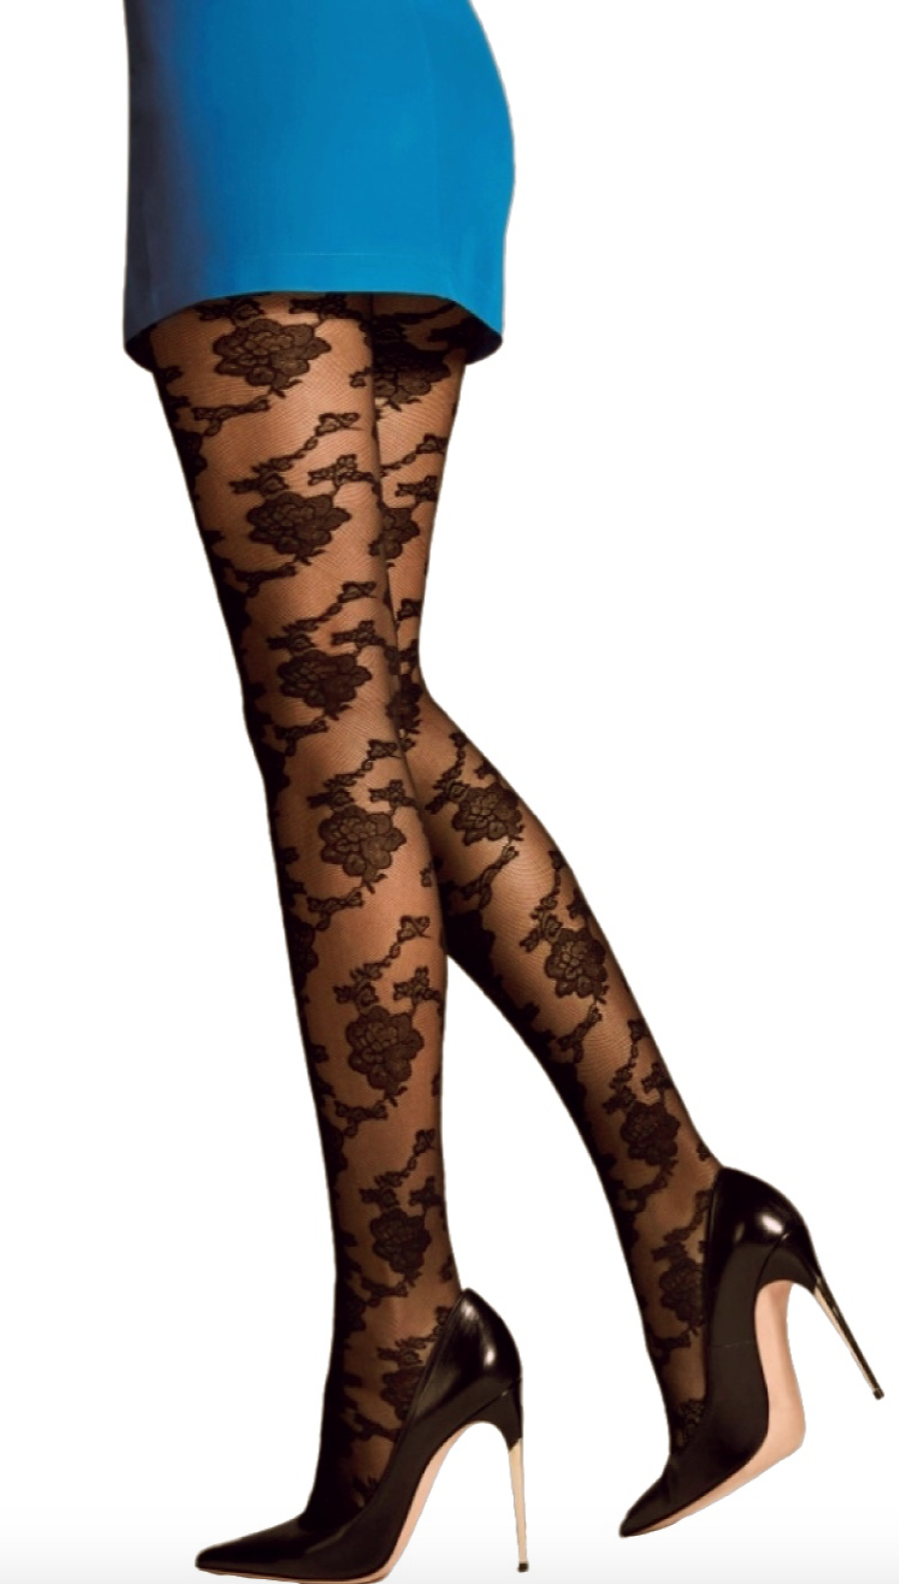 Omsa 3452 Winterlace Collant - floral lace fashion tights in brown